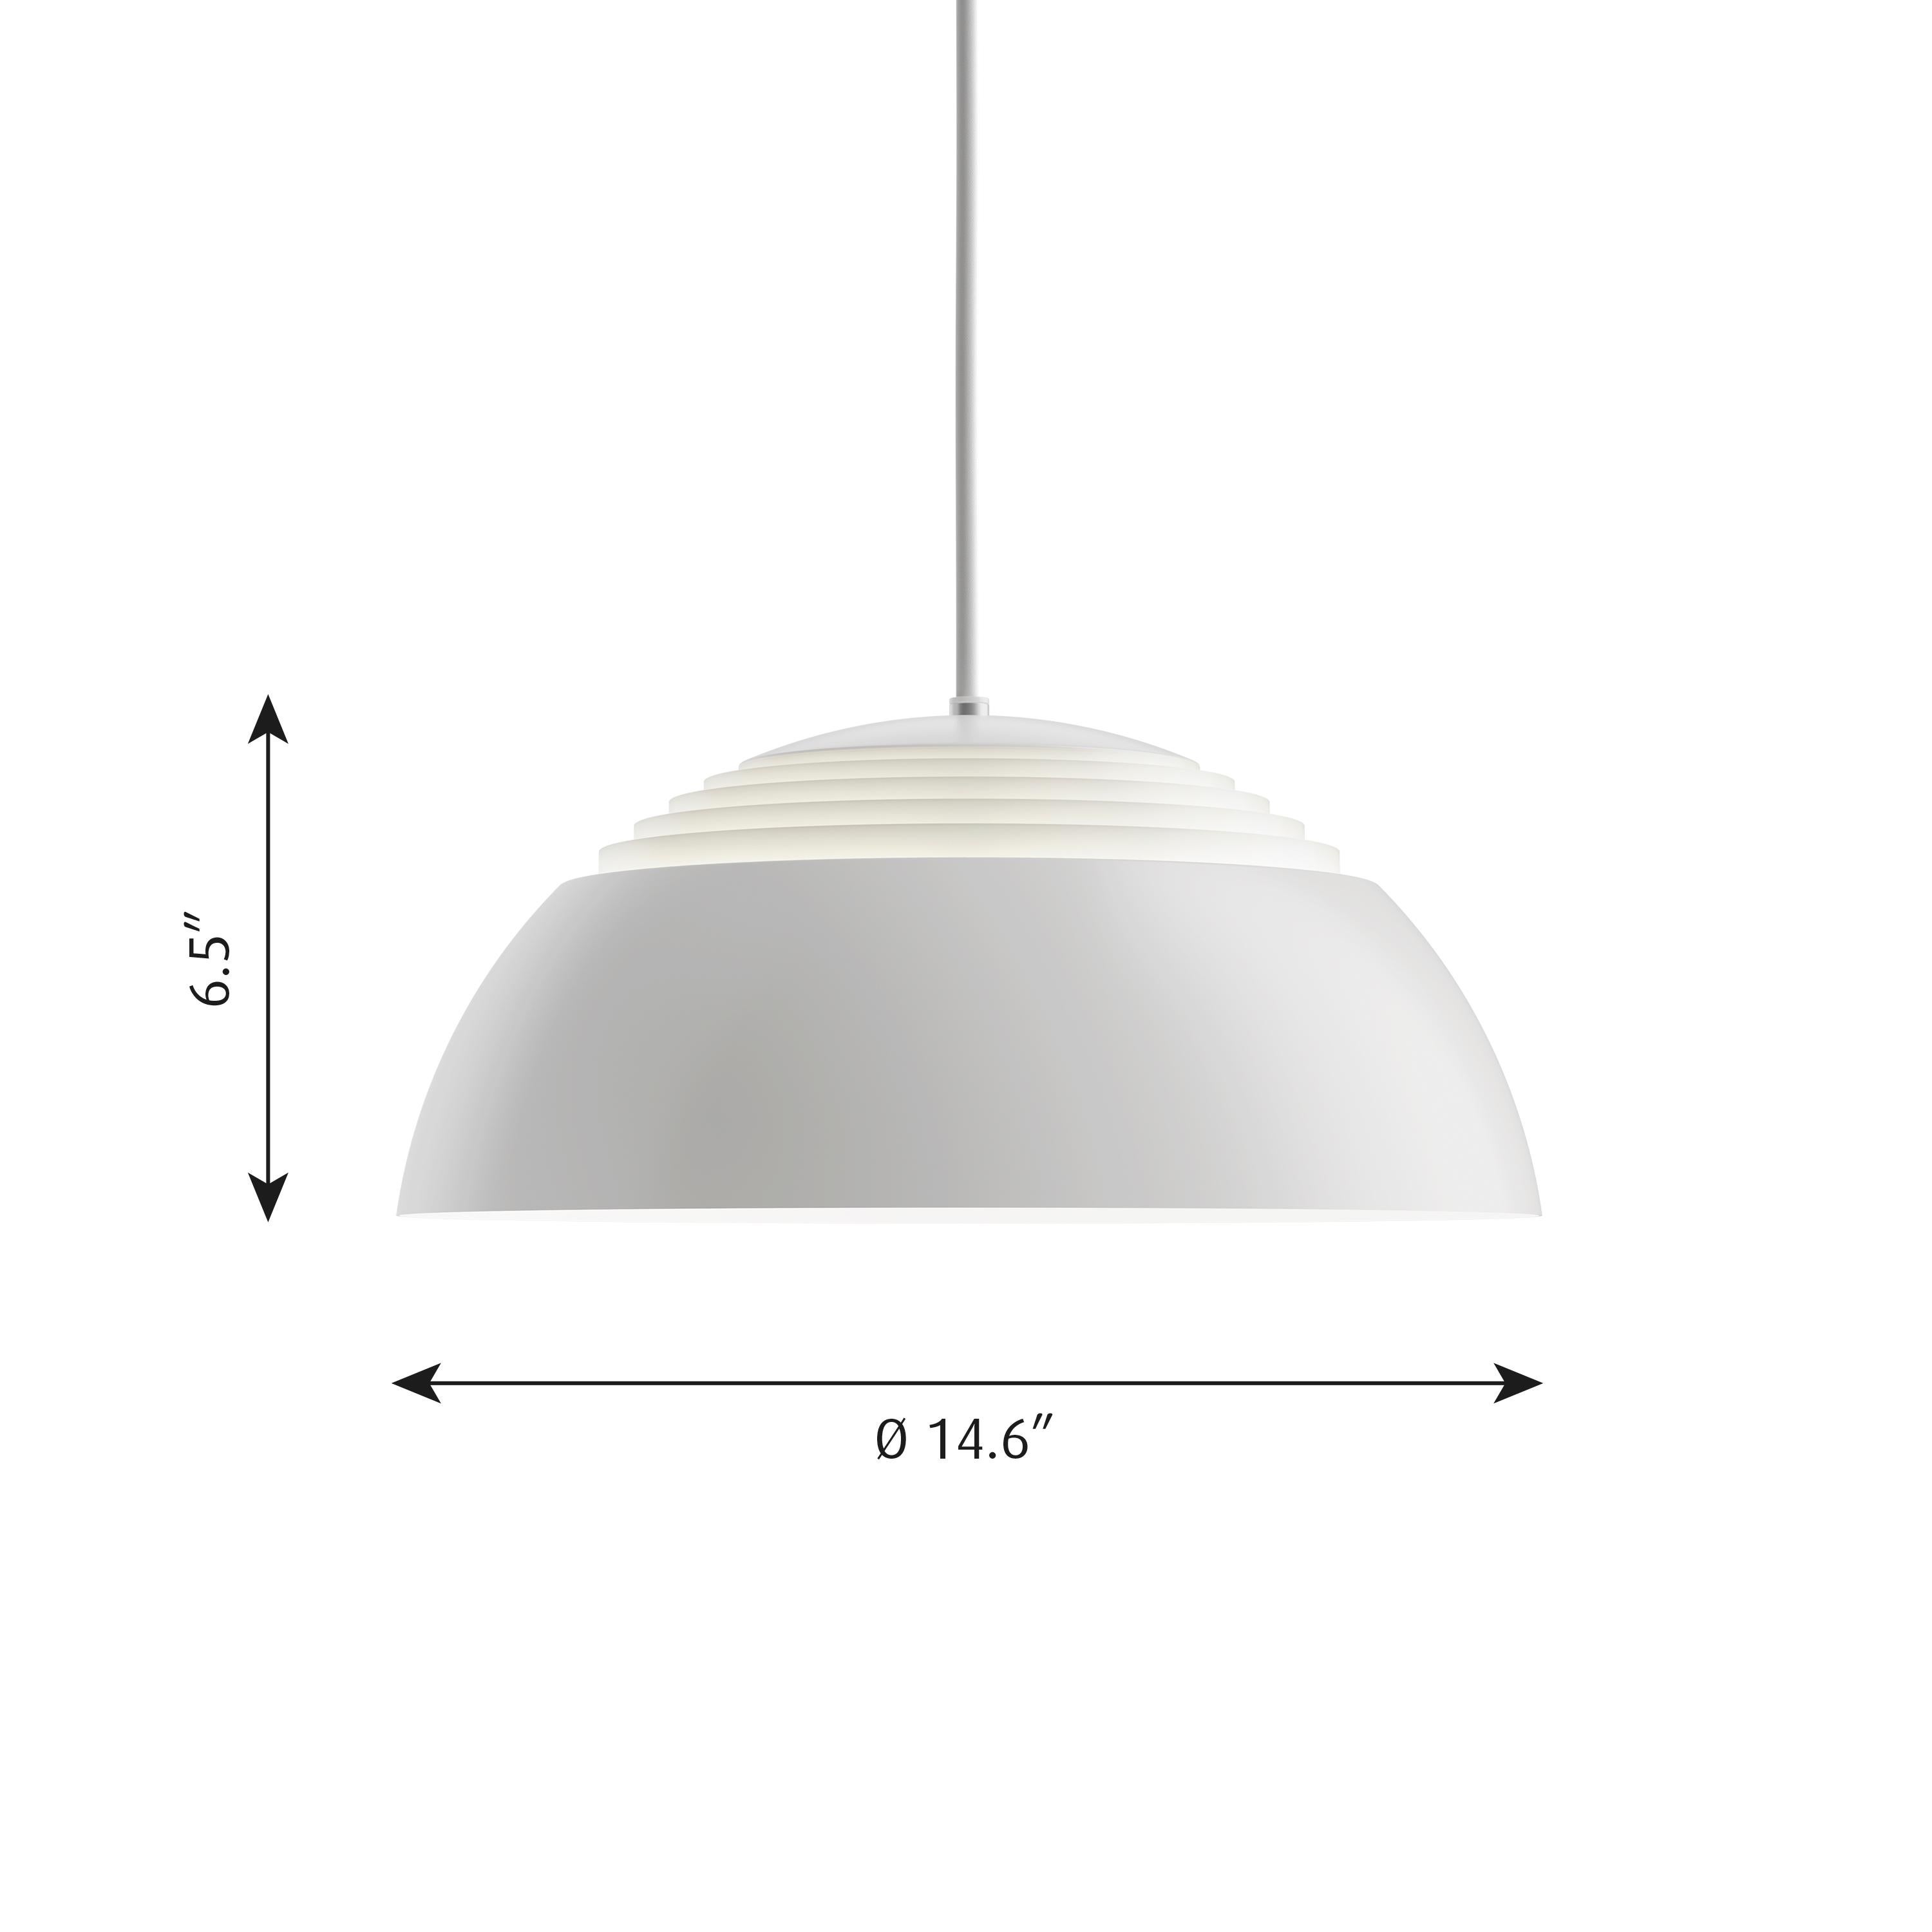 AJ Royal pendant in white by Arne Jacobsen for Louis Poulsen. Designed in 1960 by Arne Jacobsen for the SAS Royal Hotel in Copenhagen, the AJ Royal is an icon that follows Jacobsen's overall geometric shape concept. The spherical dome shape is